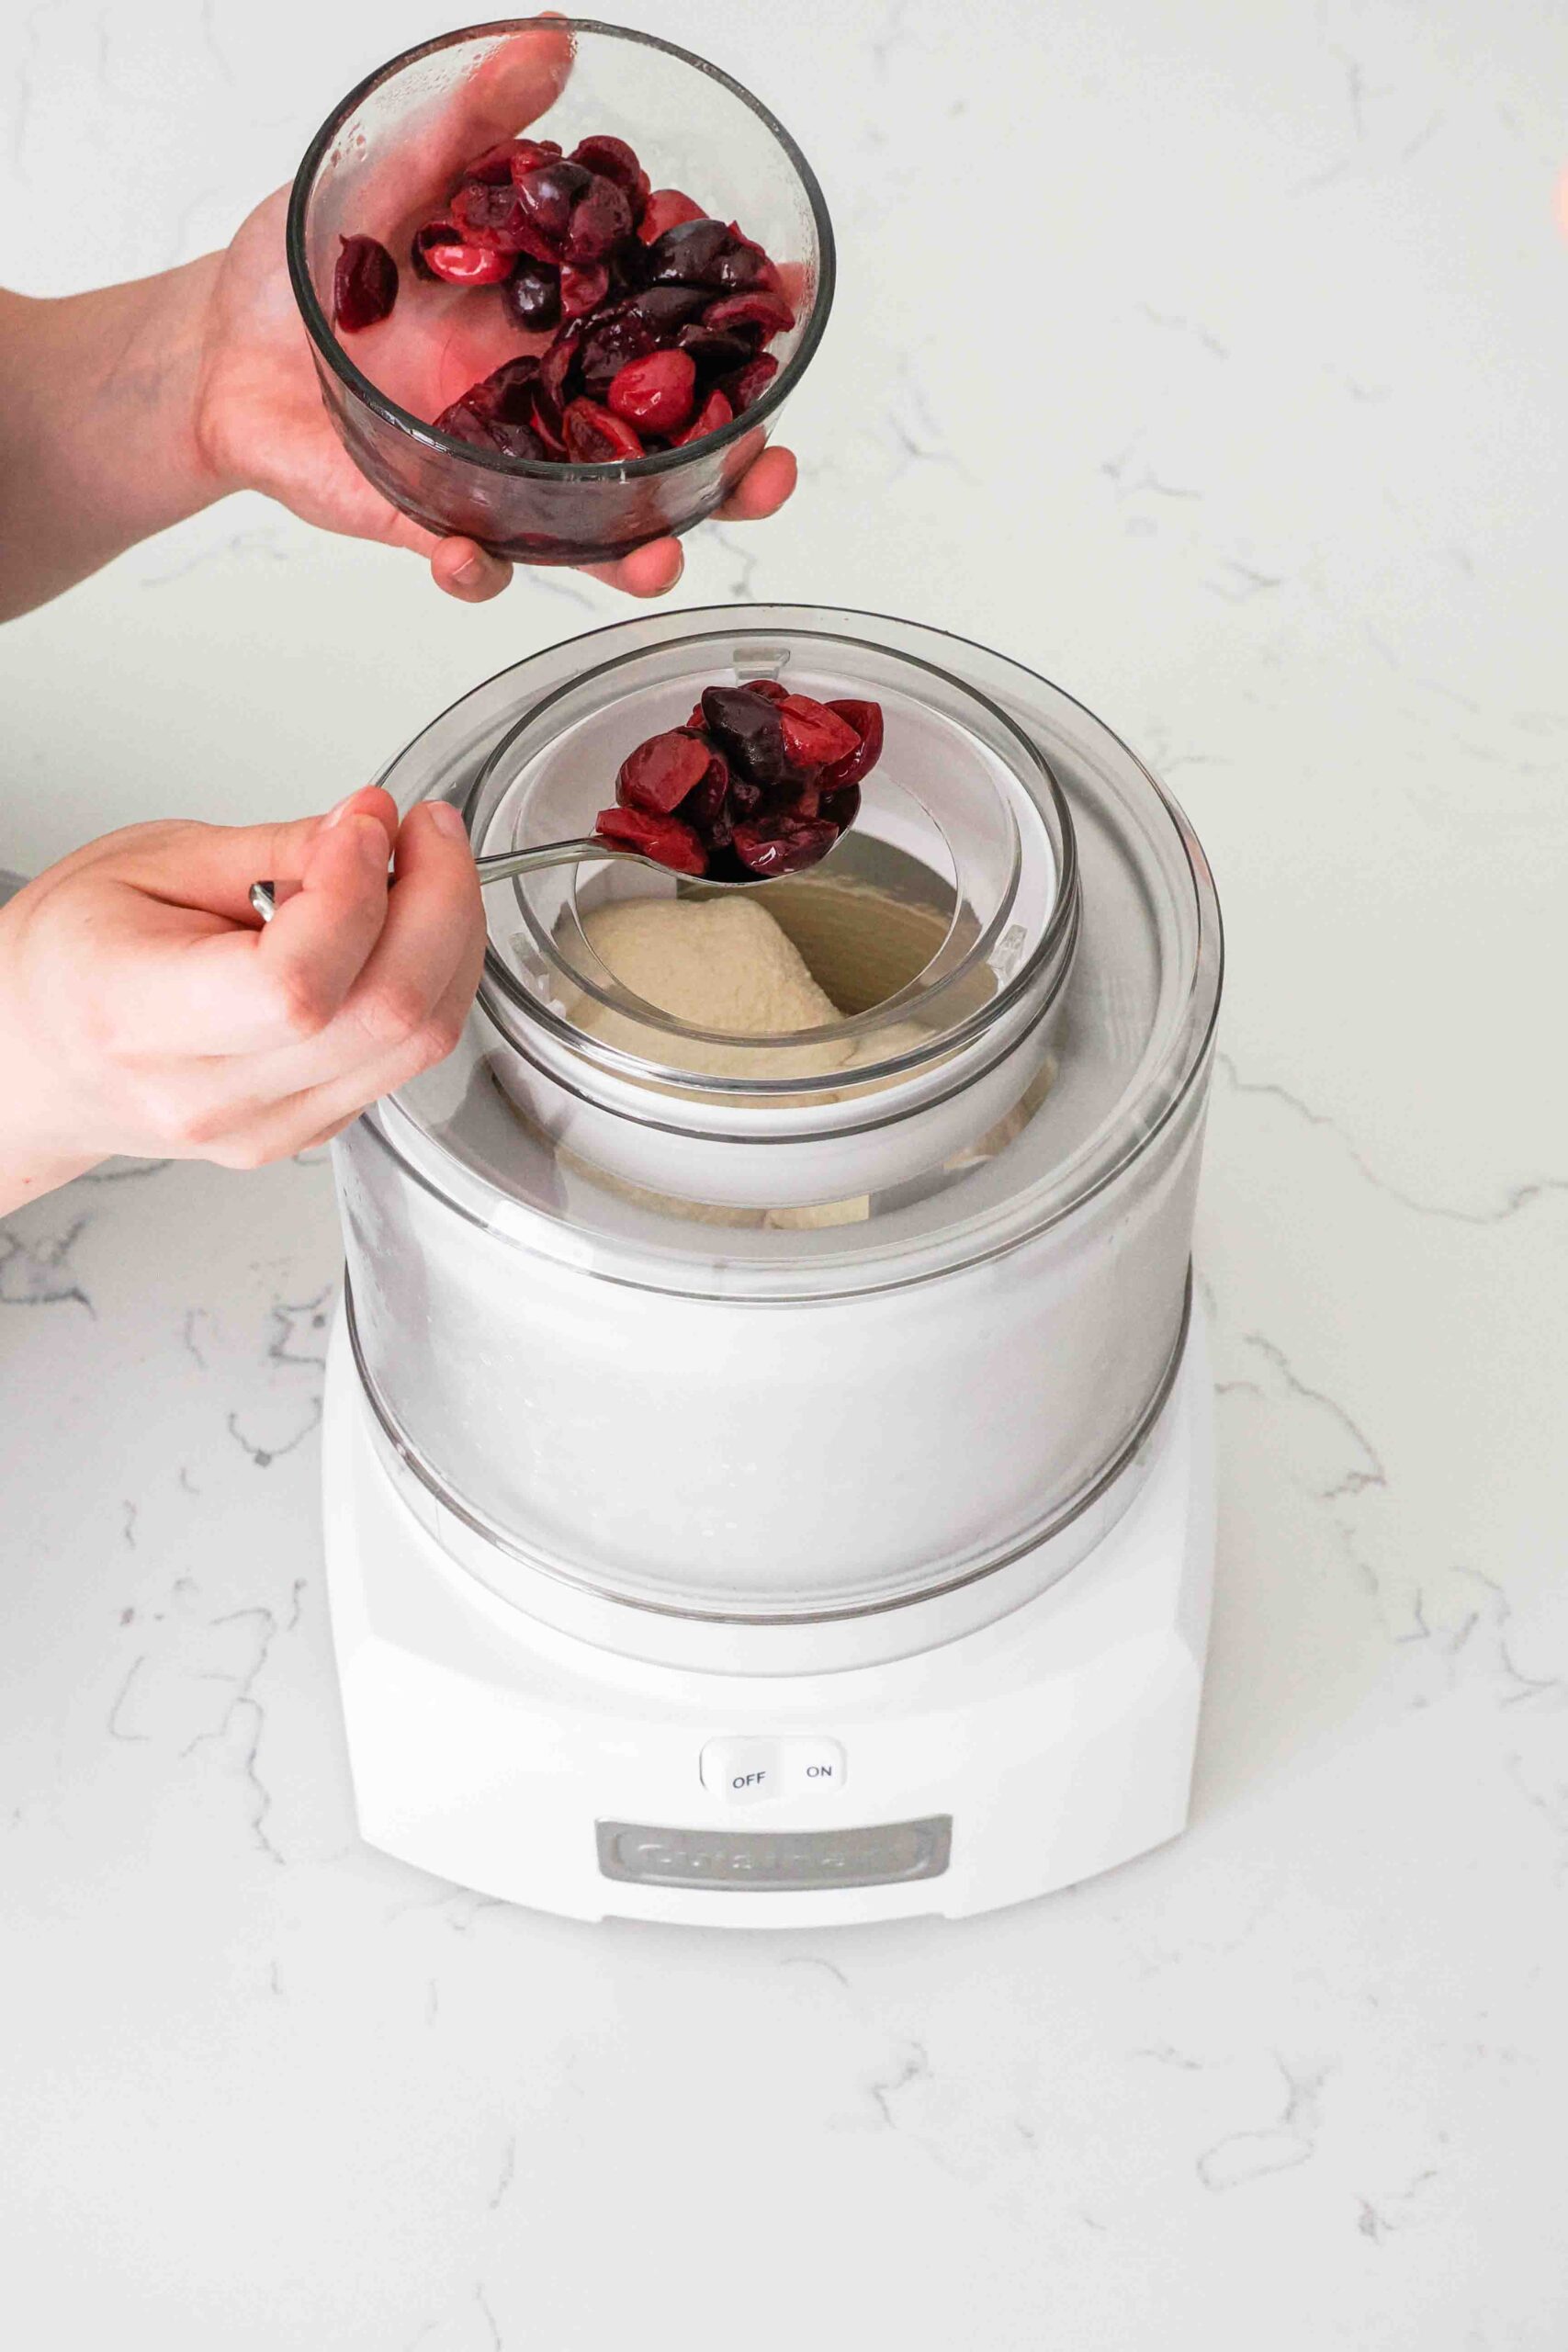 A spoonful of softened cherries are added to the churning cherry custard.